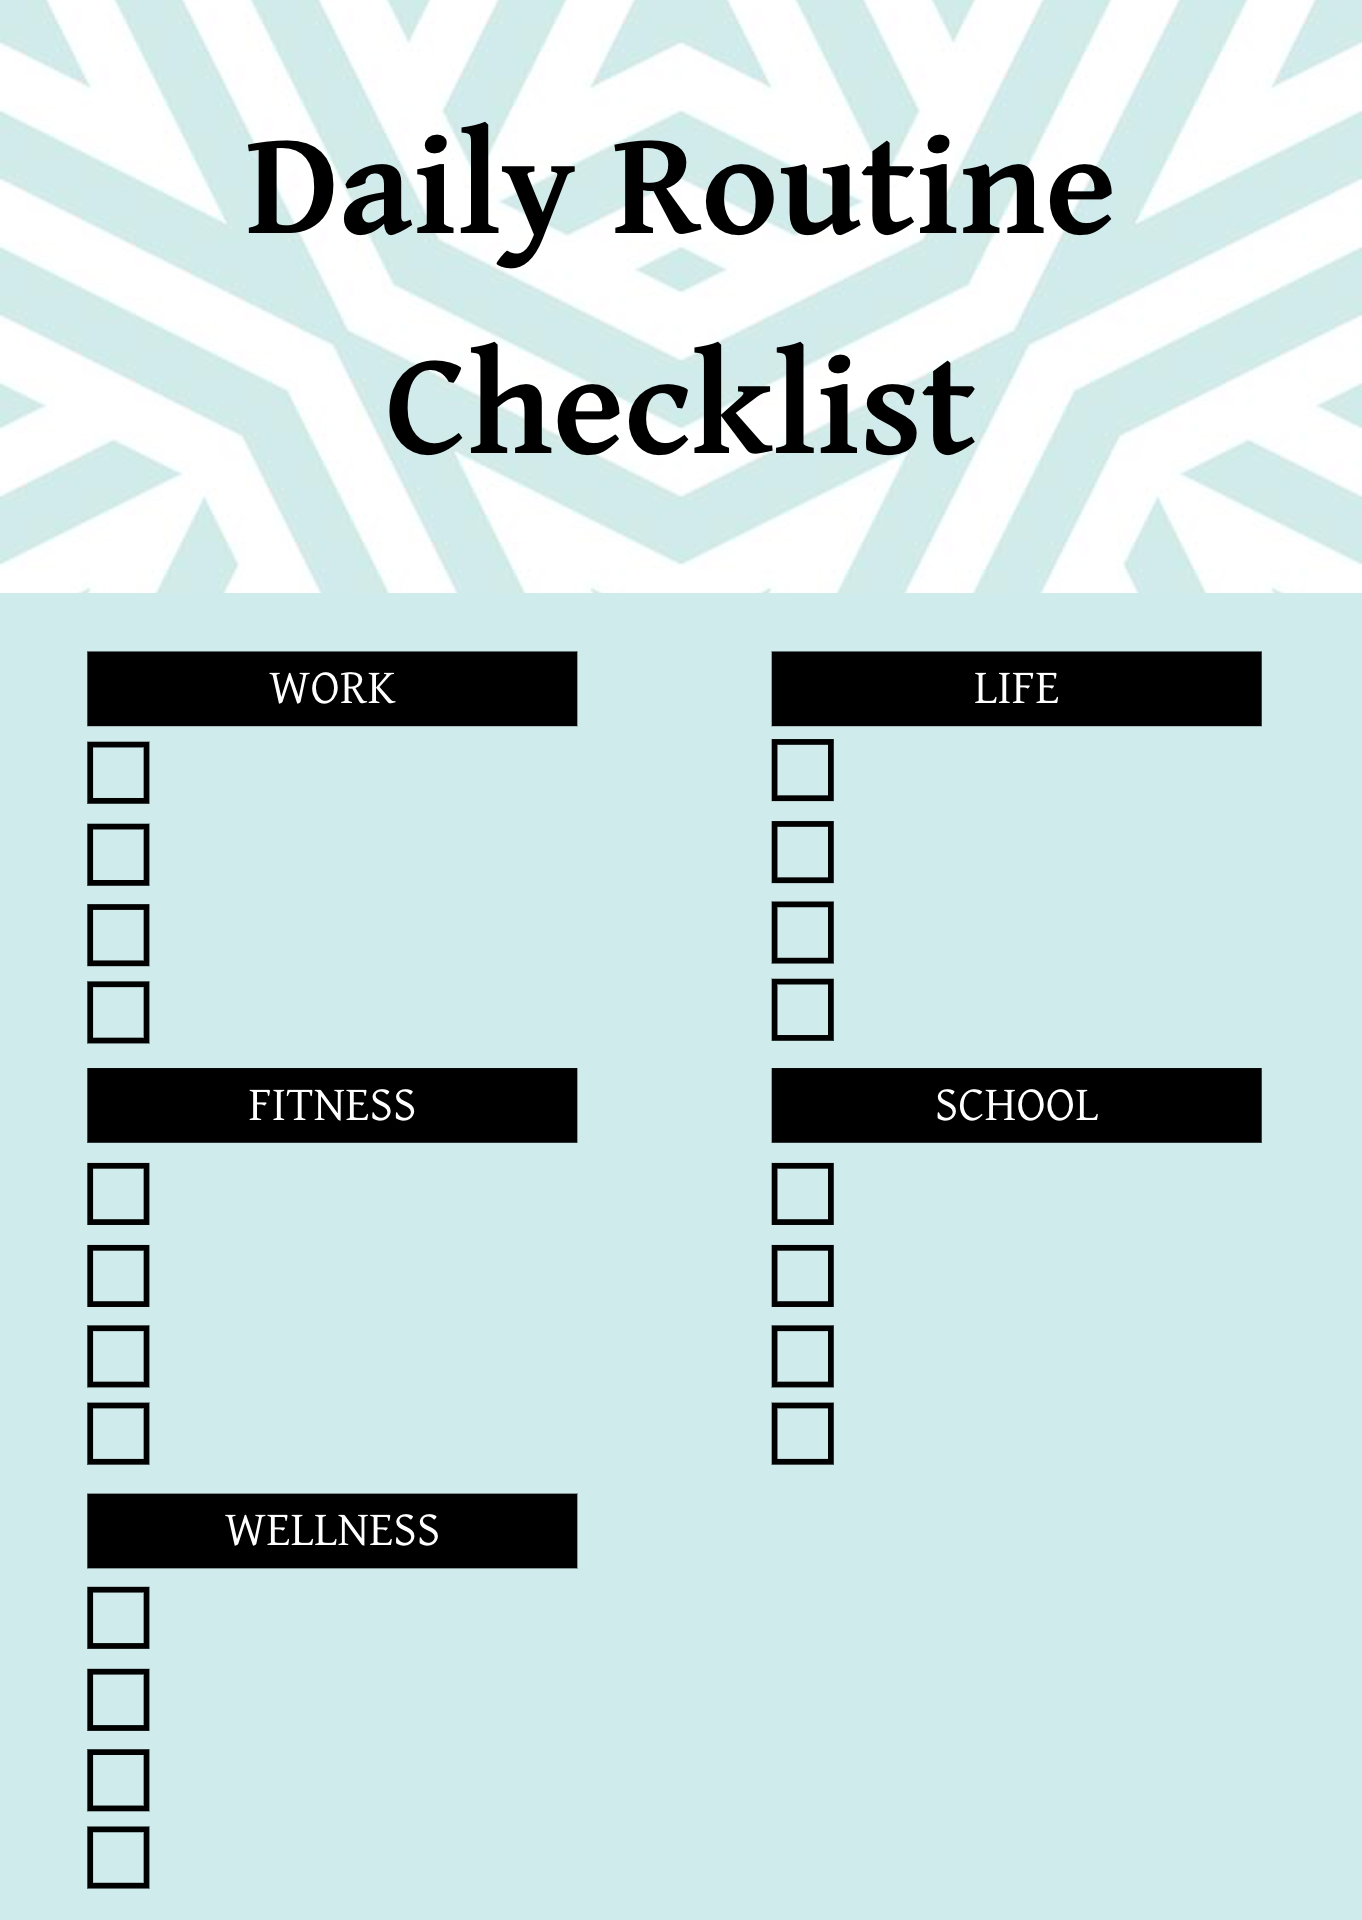 Daily Routine Checklist Template Inside Morning Routine Checklist Template With Regard To Morning Routine Checklist Template